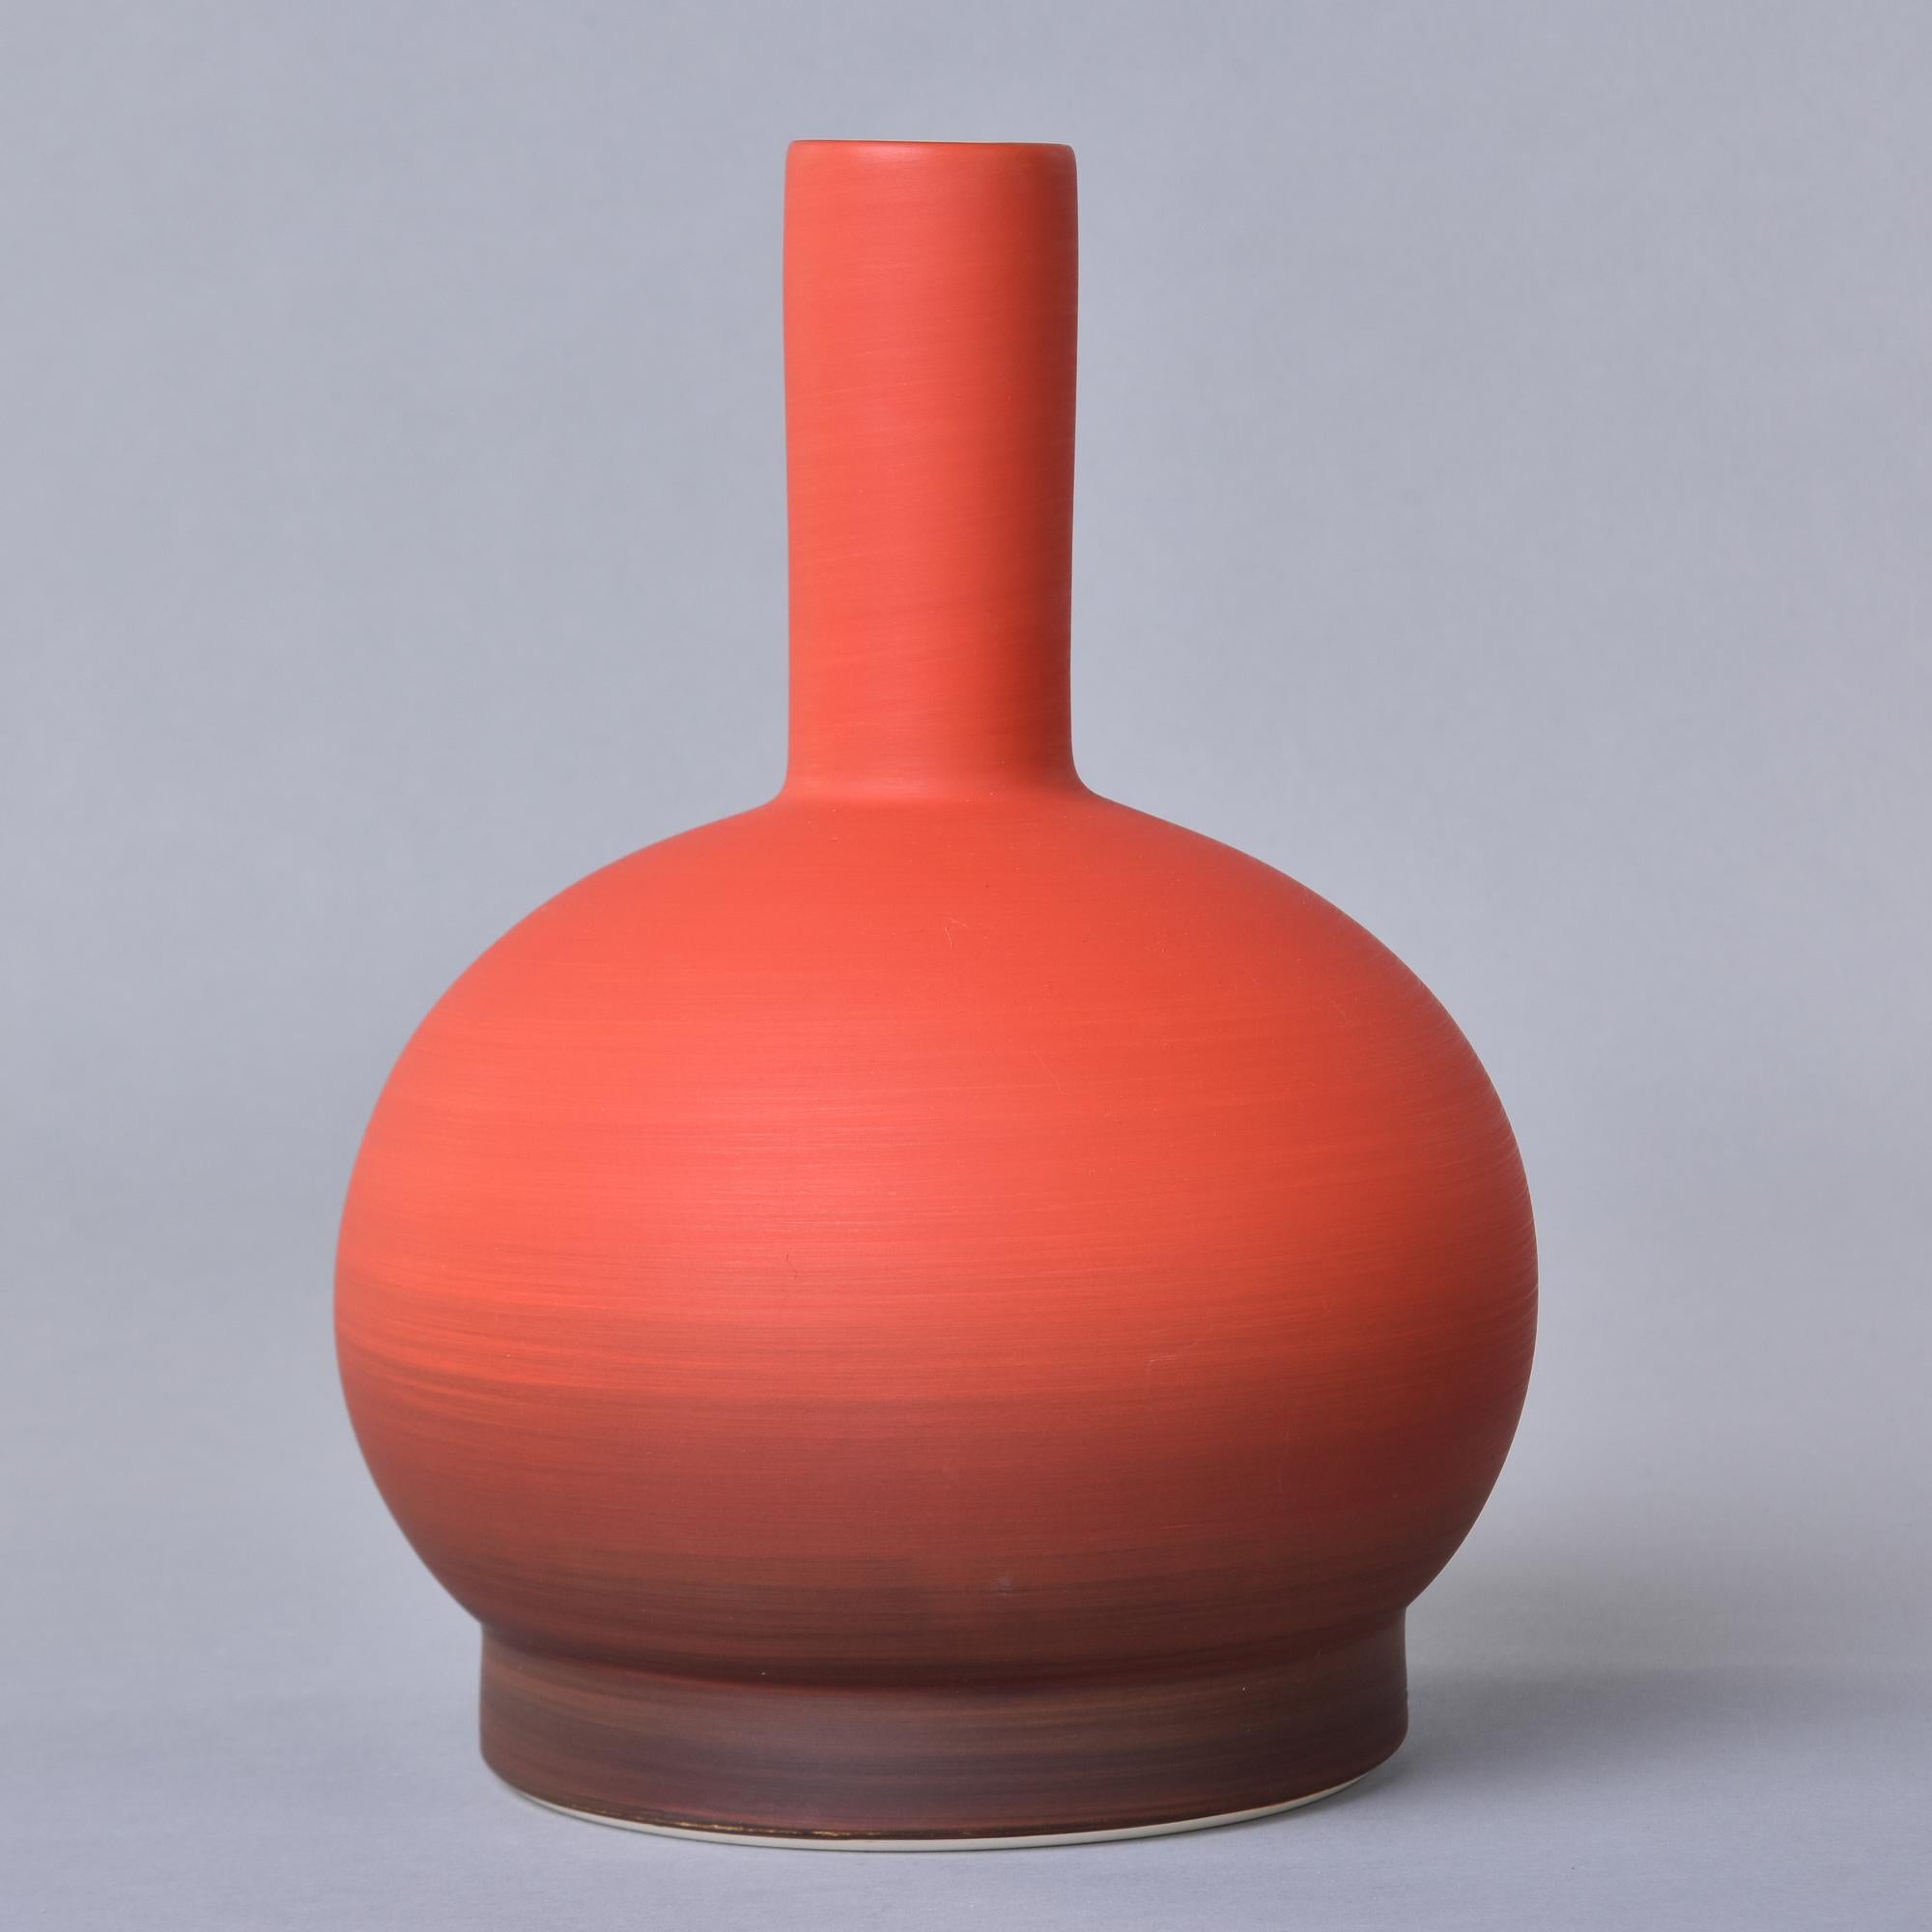 New and imported from Italy, this art pottery vase by Rina Menardi is a thin-walled vessel with generous proportions. Round, globe-shaped base with a tall, narrow neck and vibrant shaded red glaze. Underside of base has maker’s mark. New with no